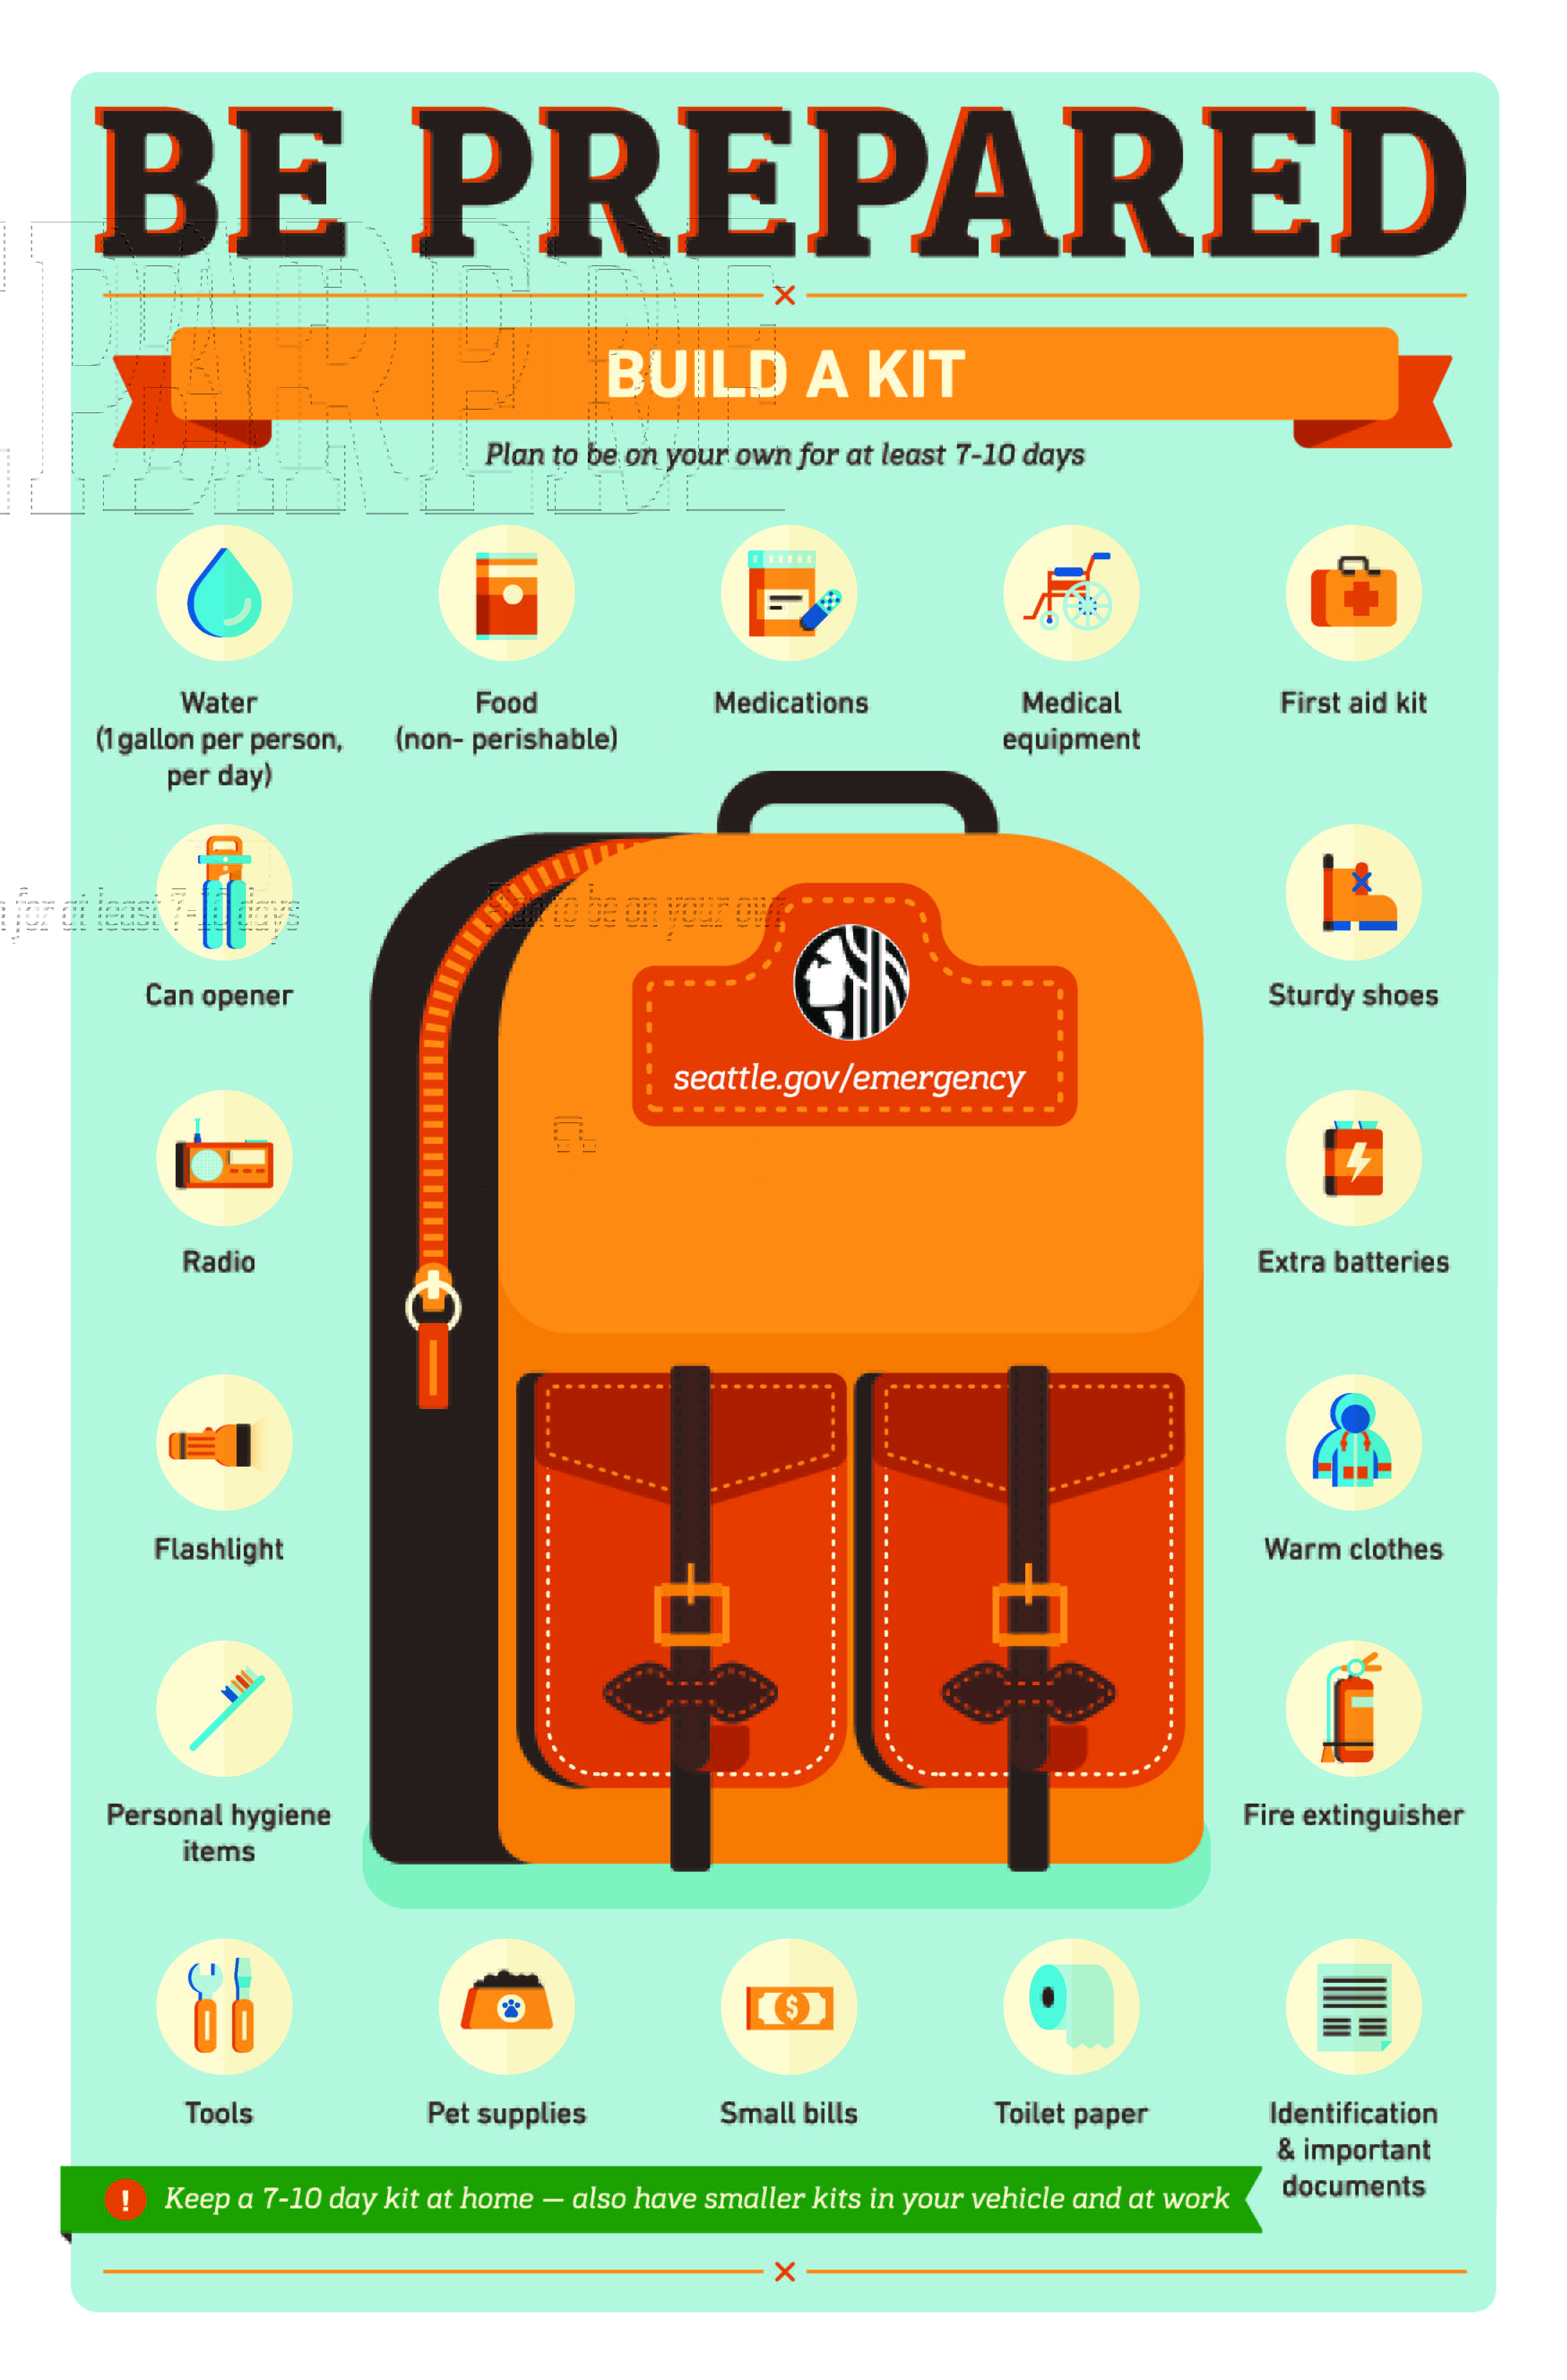 Steps you can take to be prepared for natural disasters and emergencies